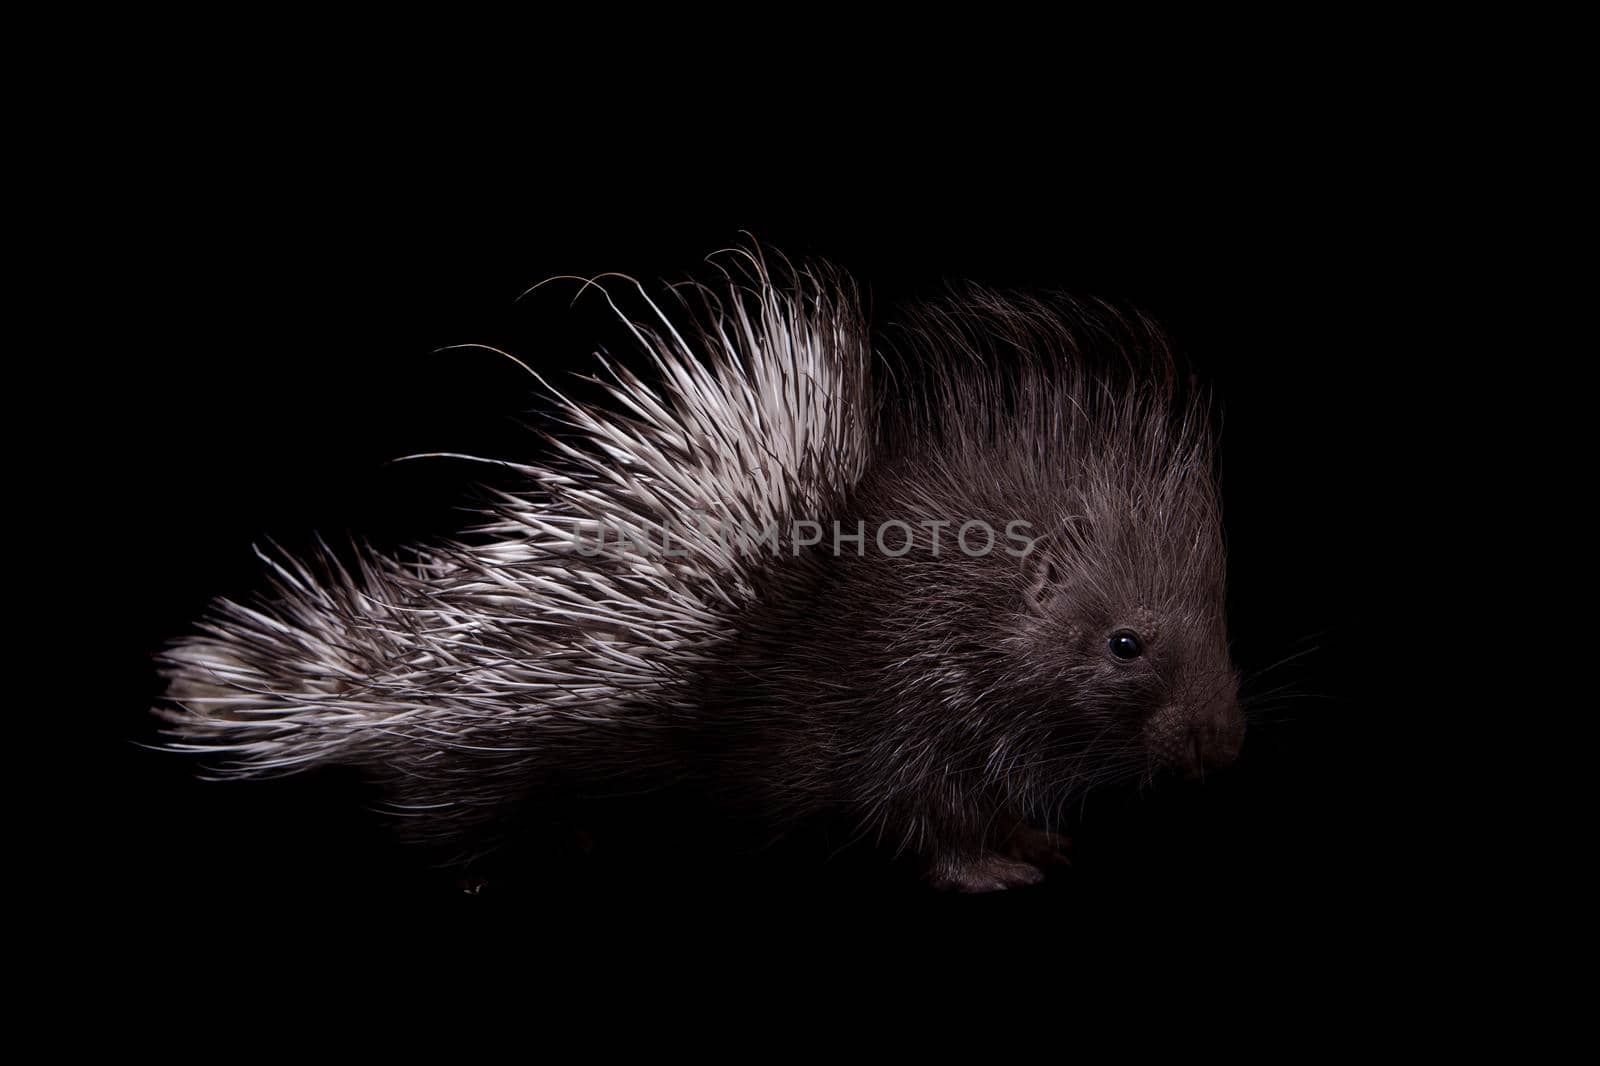 Indian crested Porcupine baby, Hystrix indica, isolated on black background